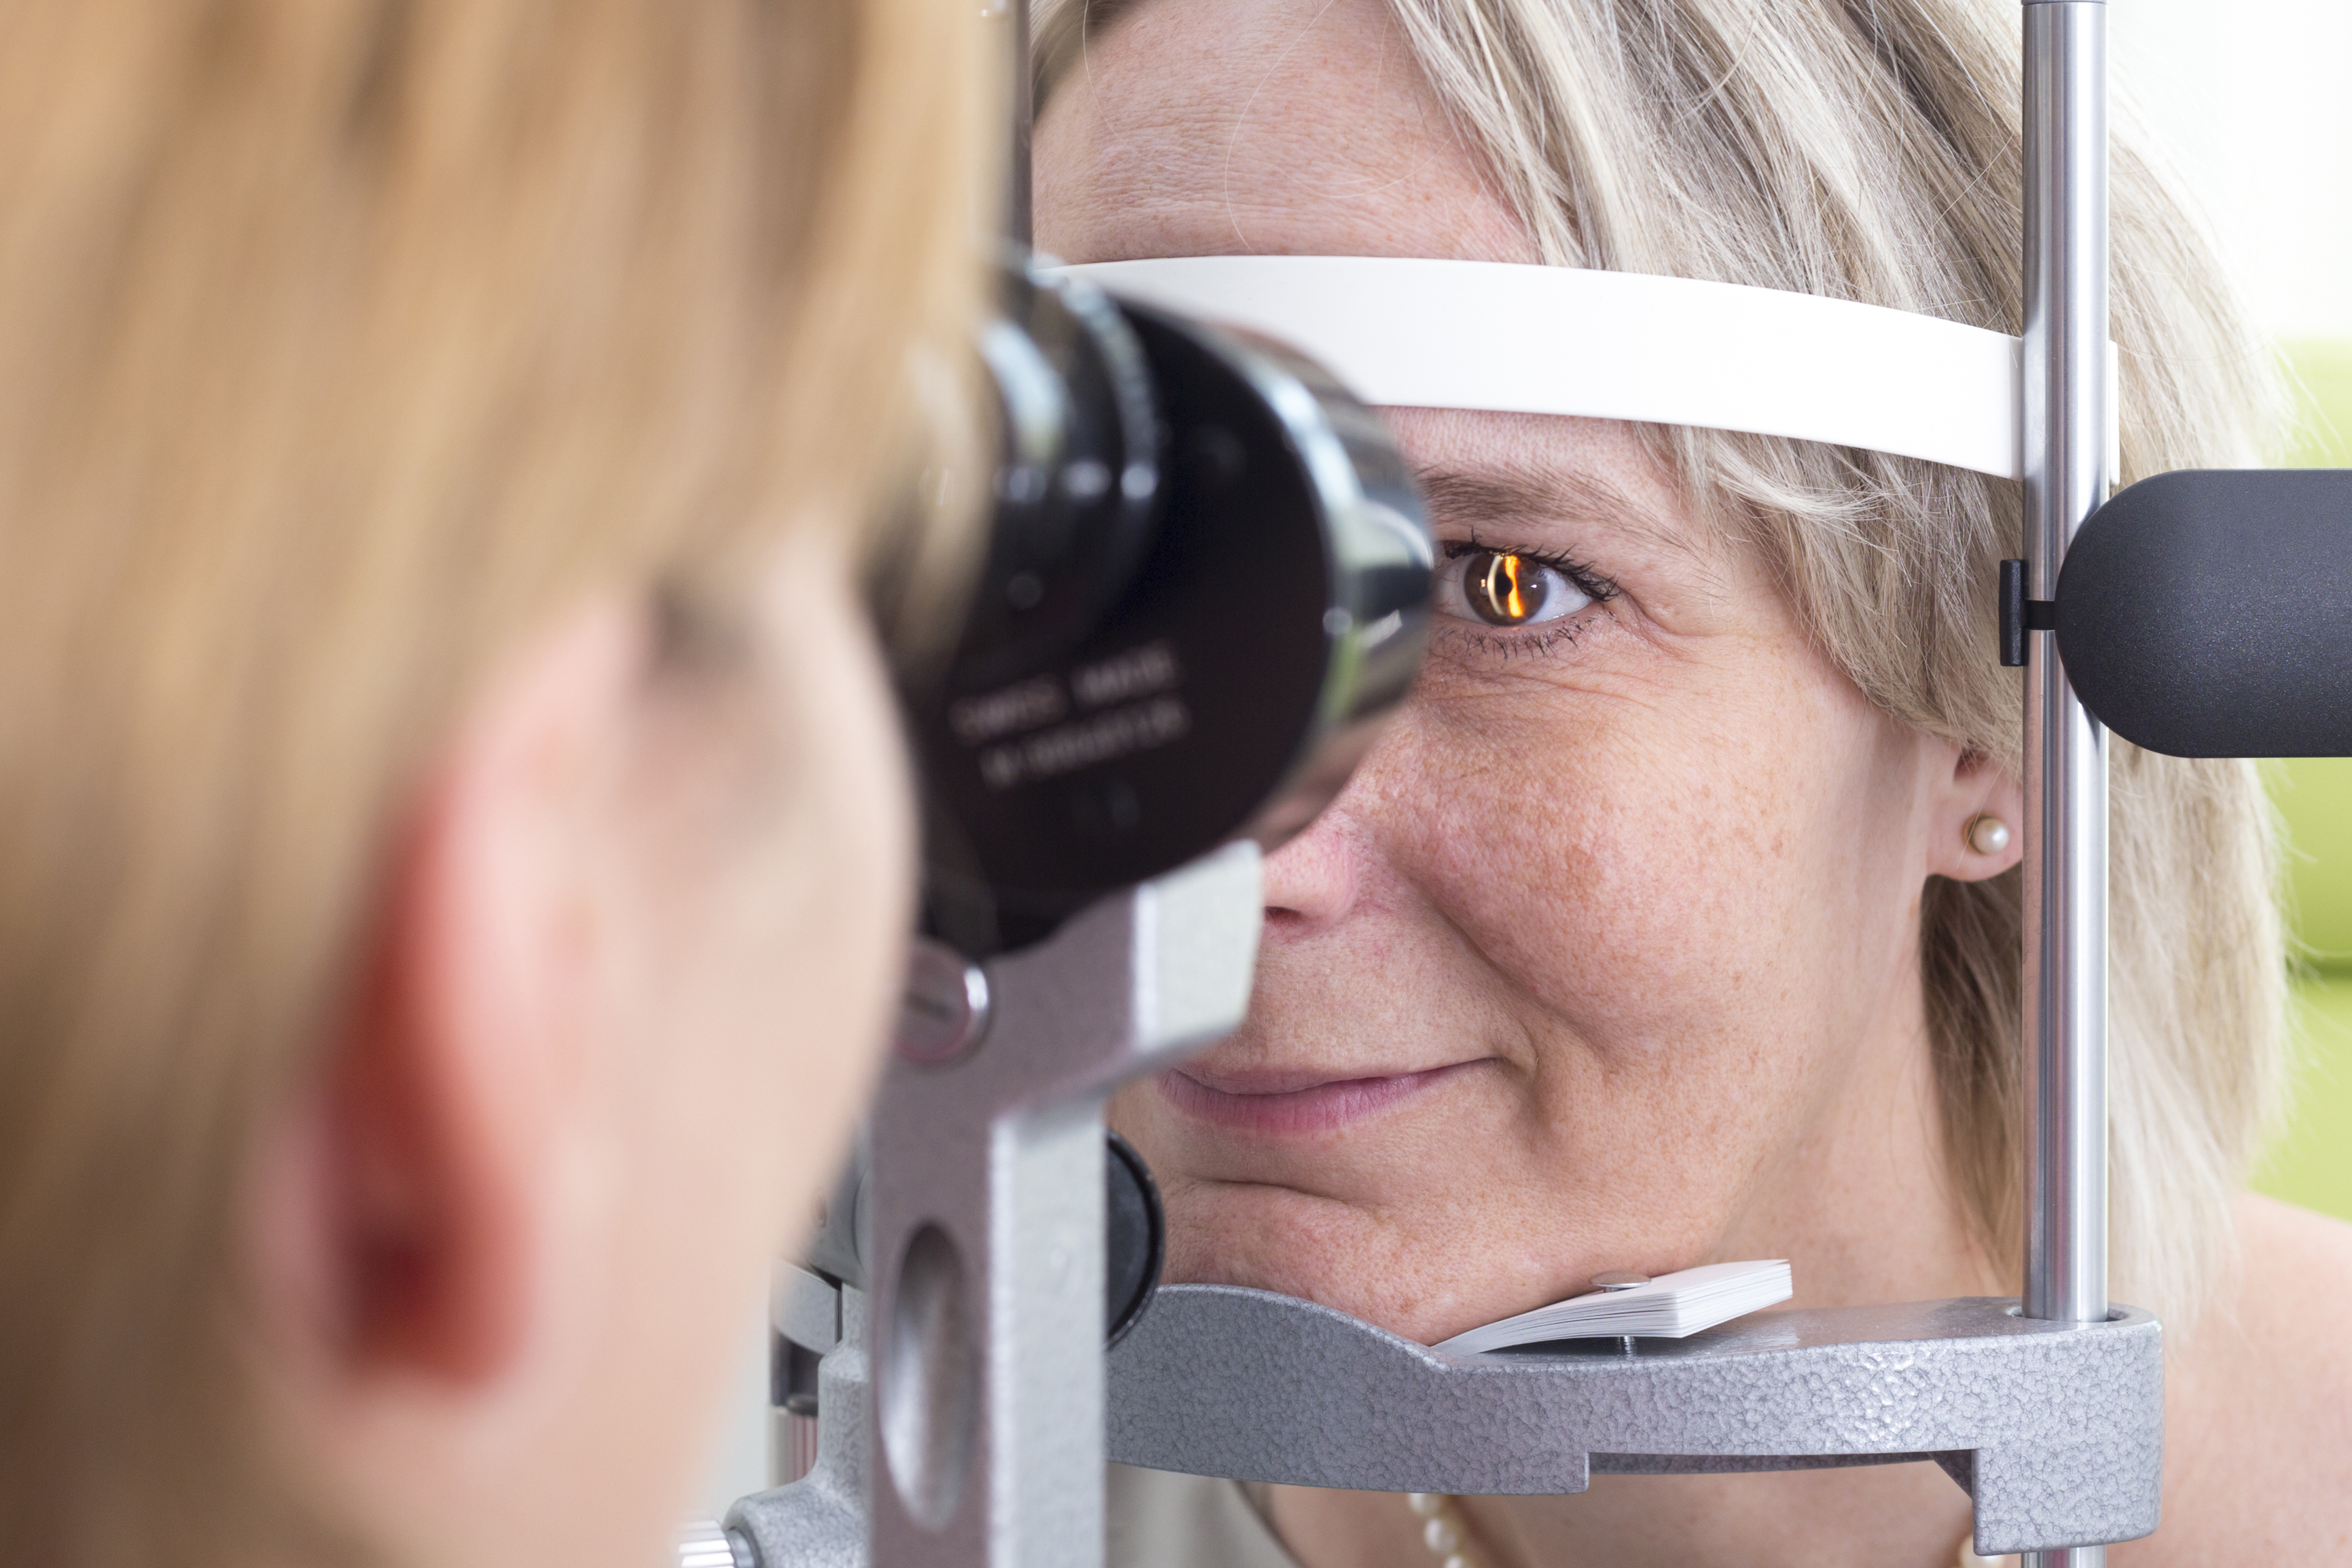 A diabetic eye exam to look at the connection between diabetes and vision